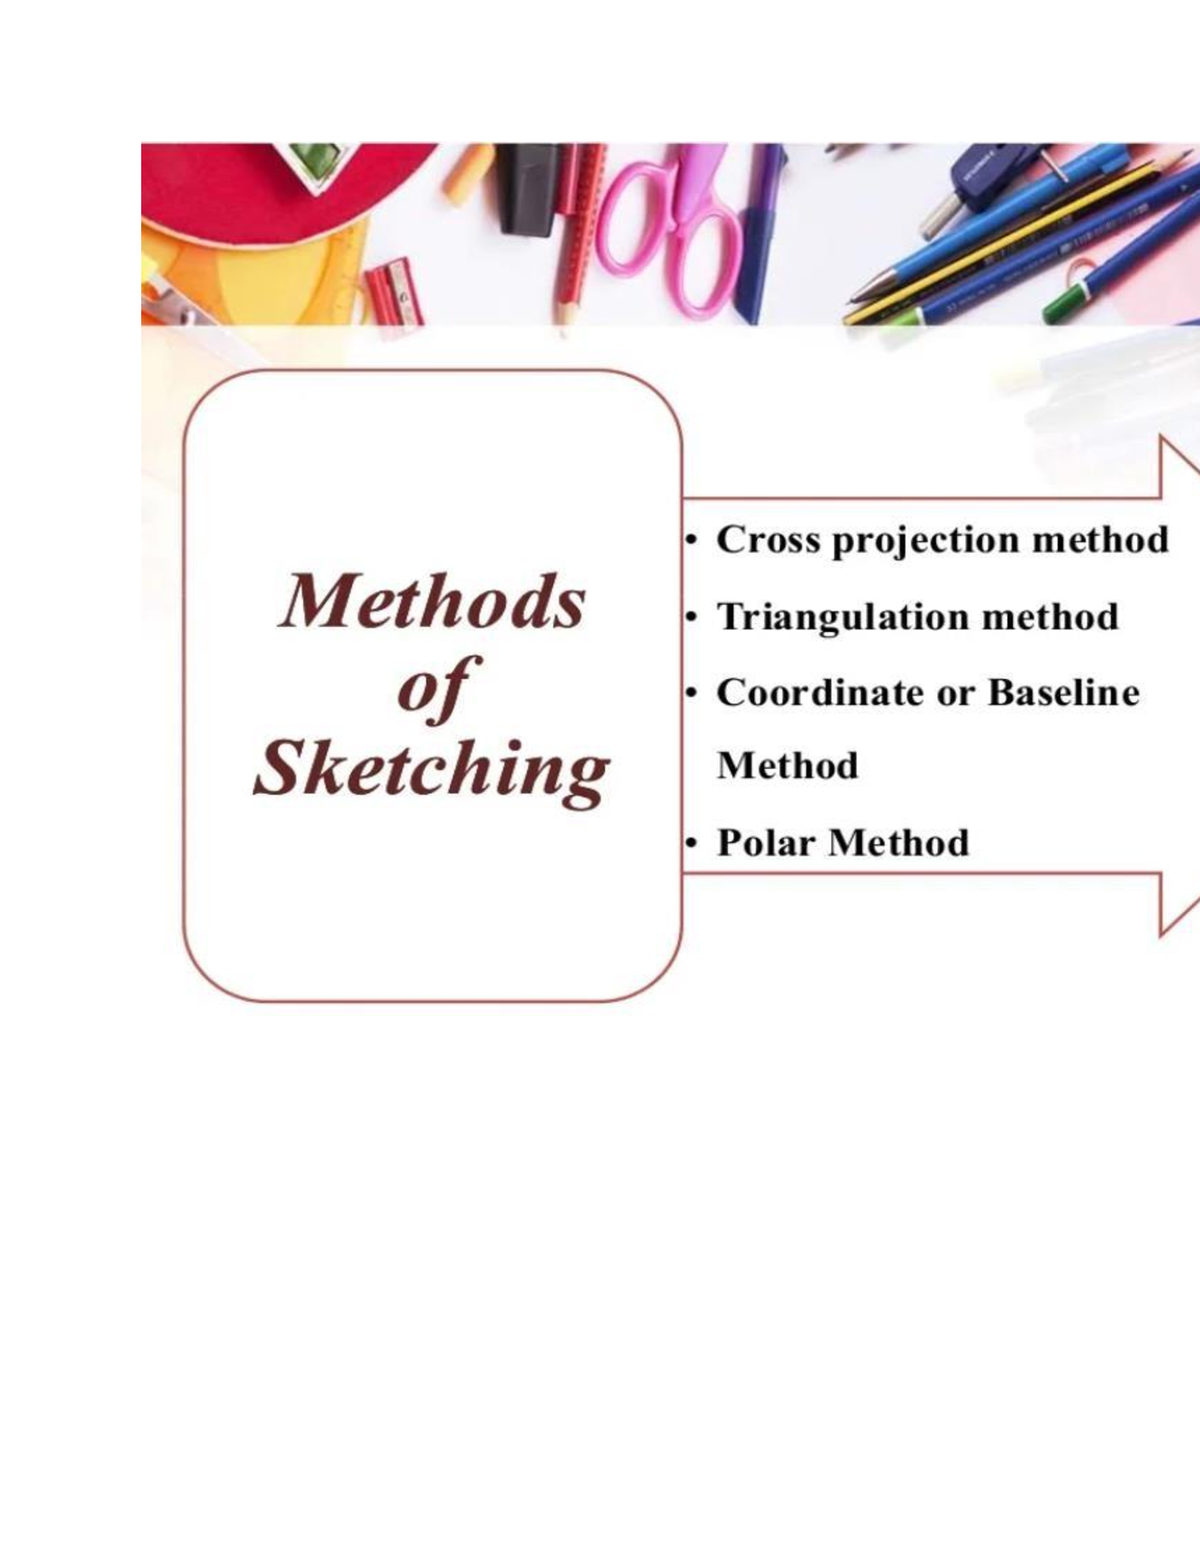 1.06 Crime Scene Sketch GOALS FOR THIS LESSON - ppt download